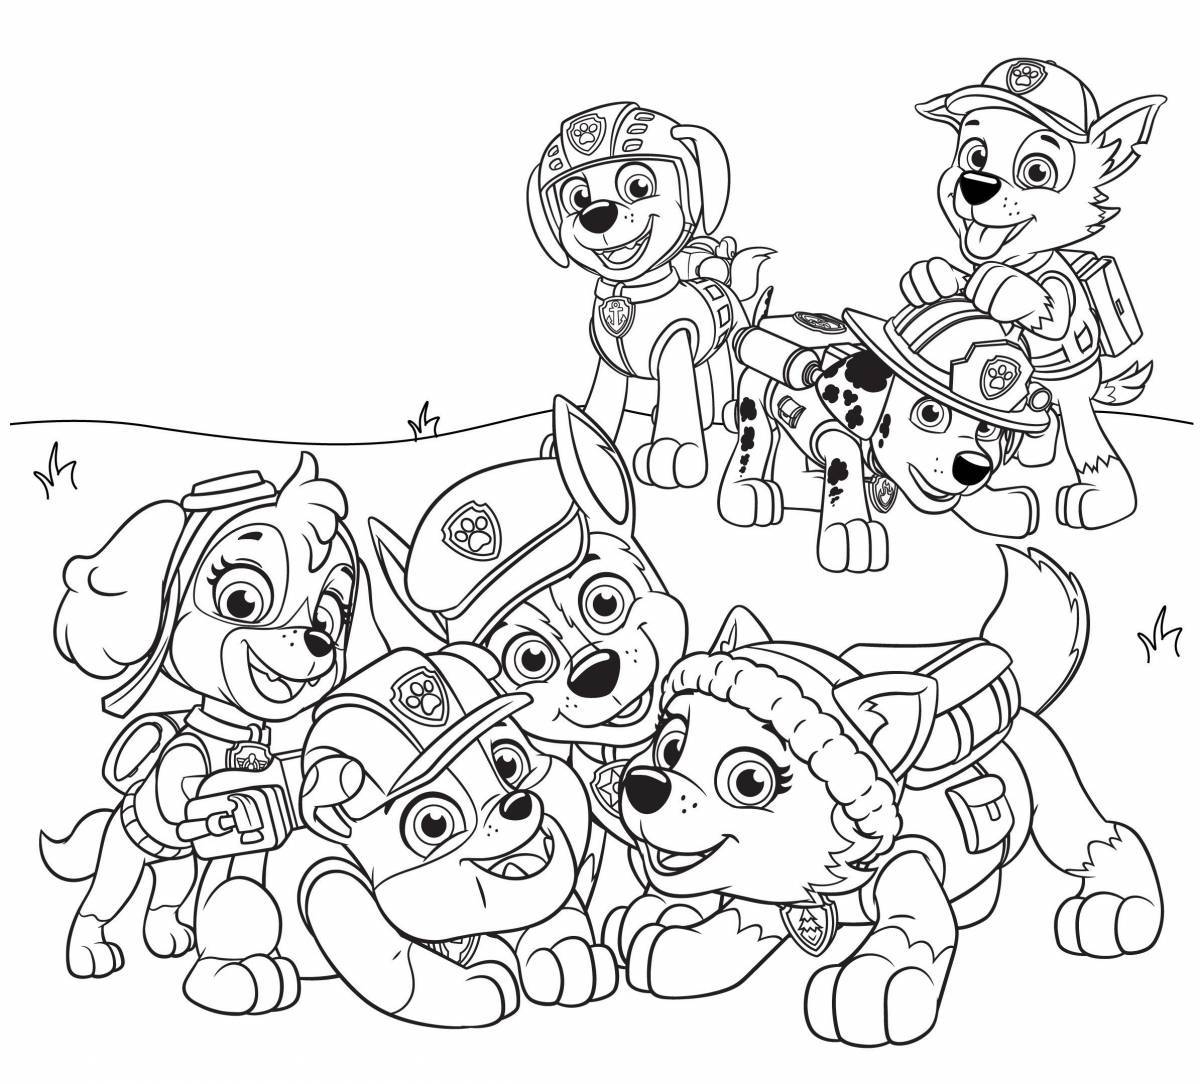 Cute paw patrol coloring book for kids 6-7 years old